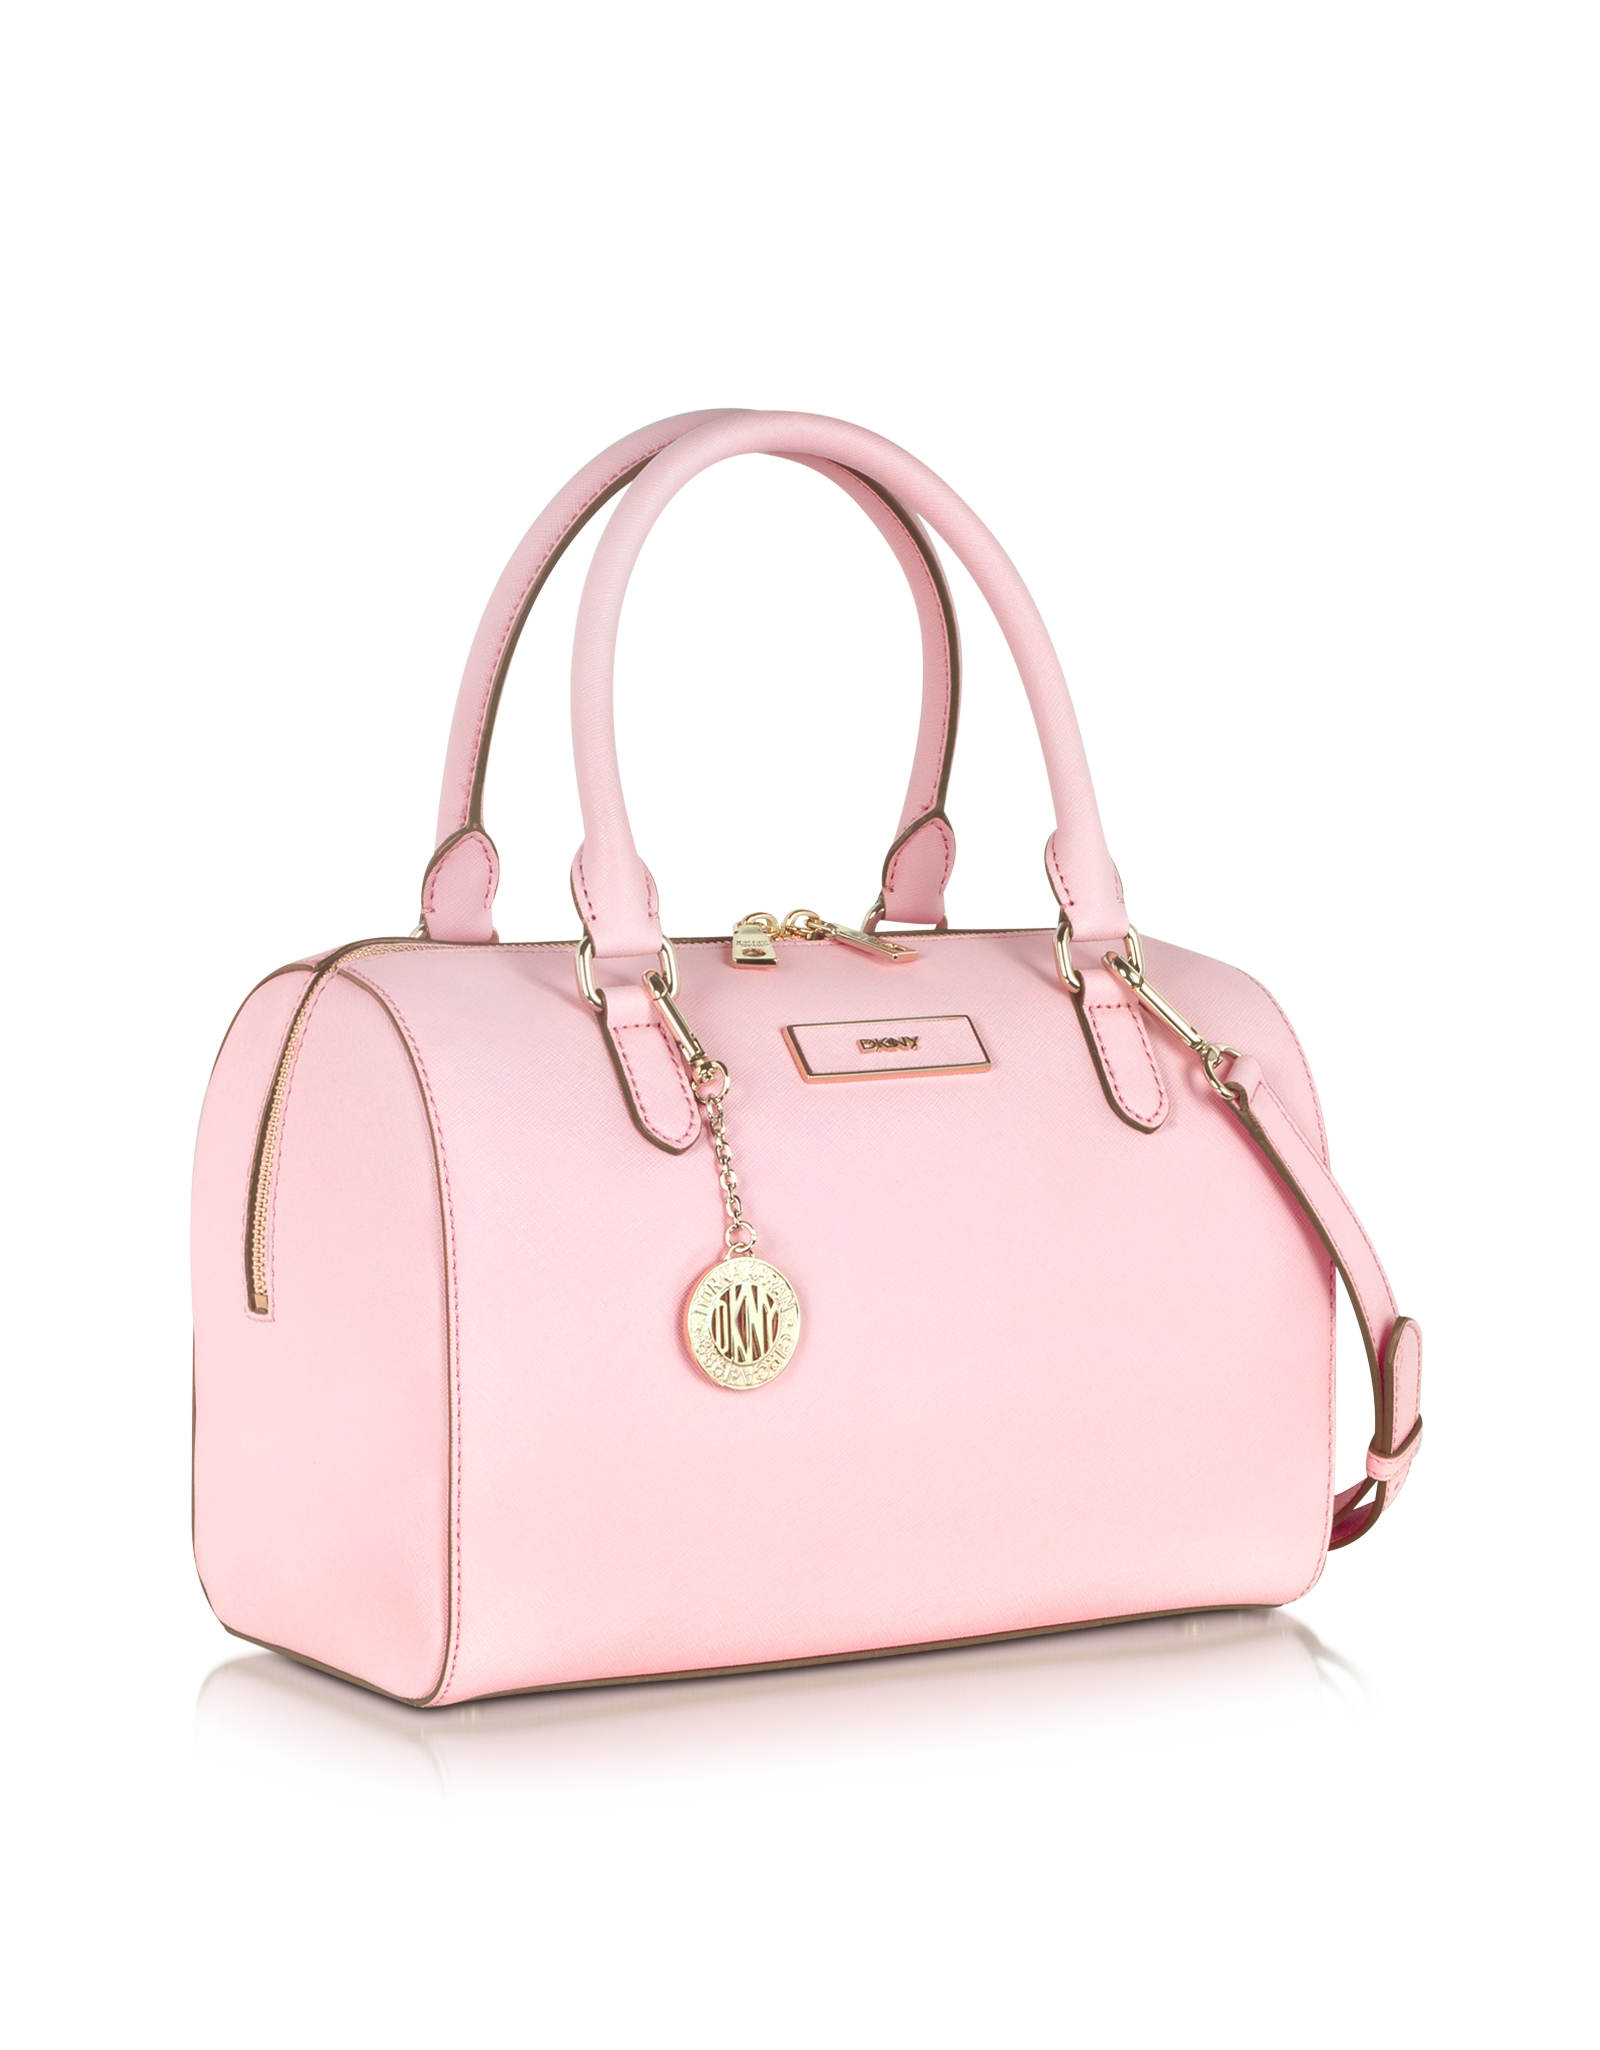 Lyst - Dkny Bryant Park Saffiano Leather Satchel Bag in Pink